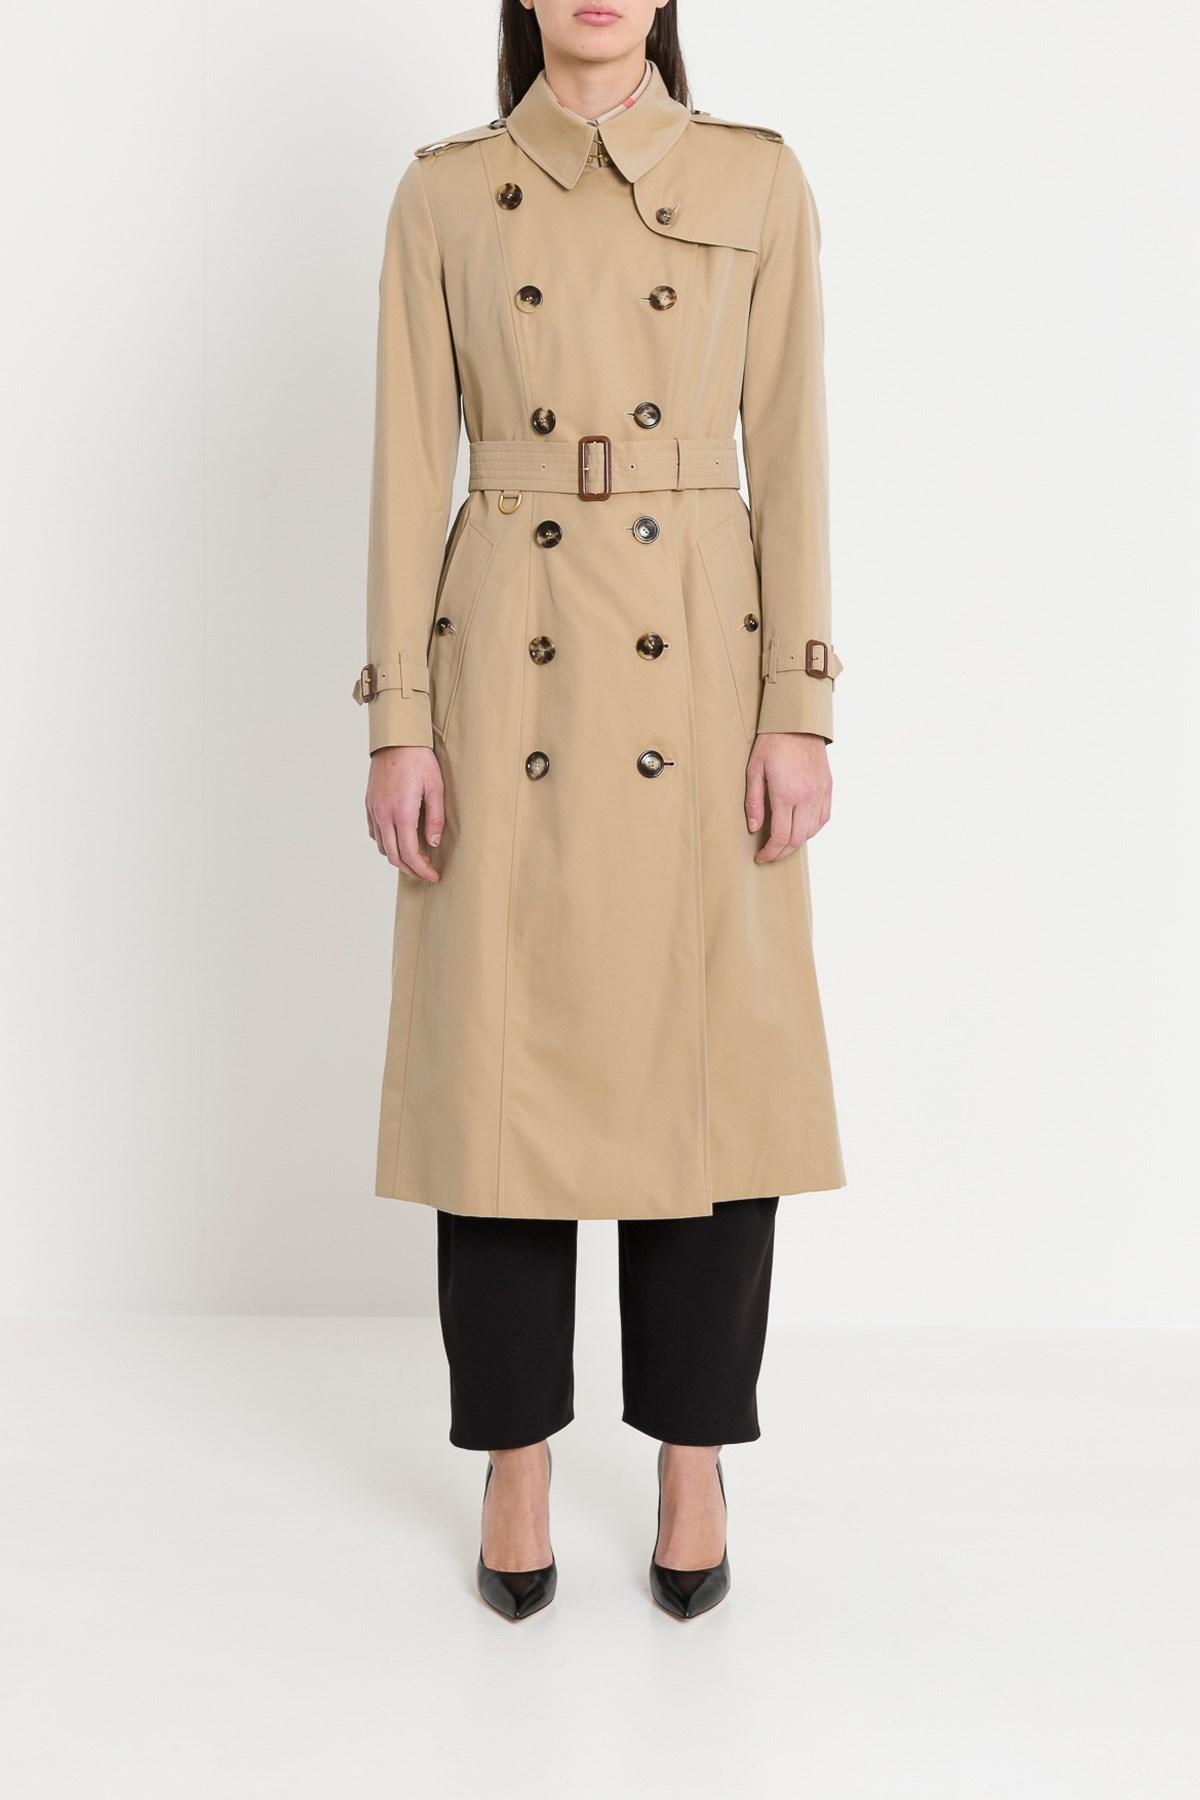 Lyst - Burberry The Long Chelsea Heritage Trench Coat in Natural